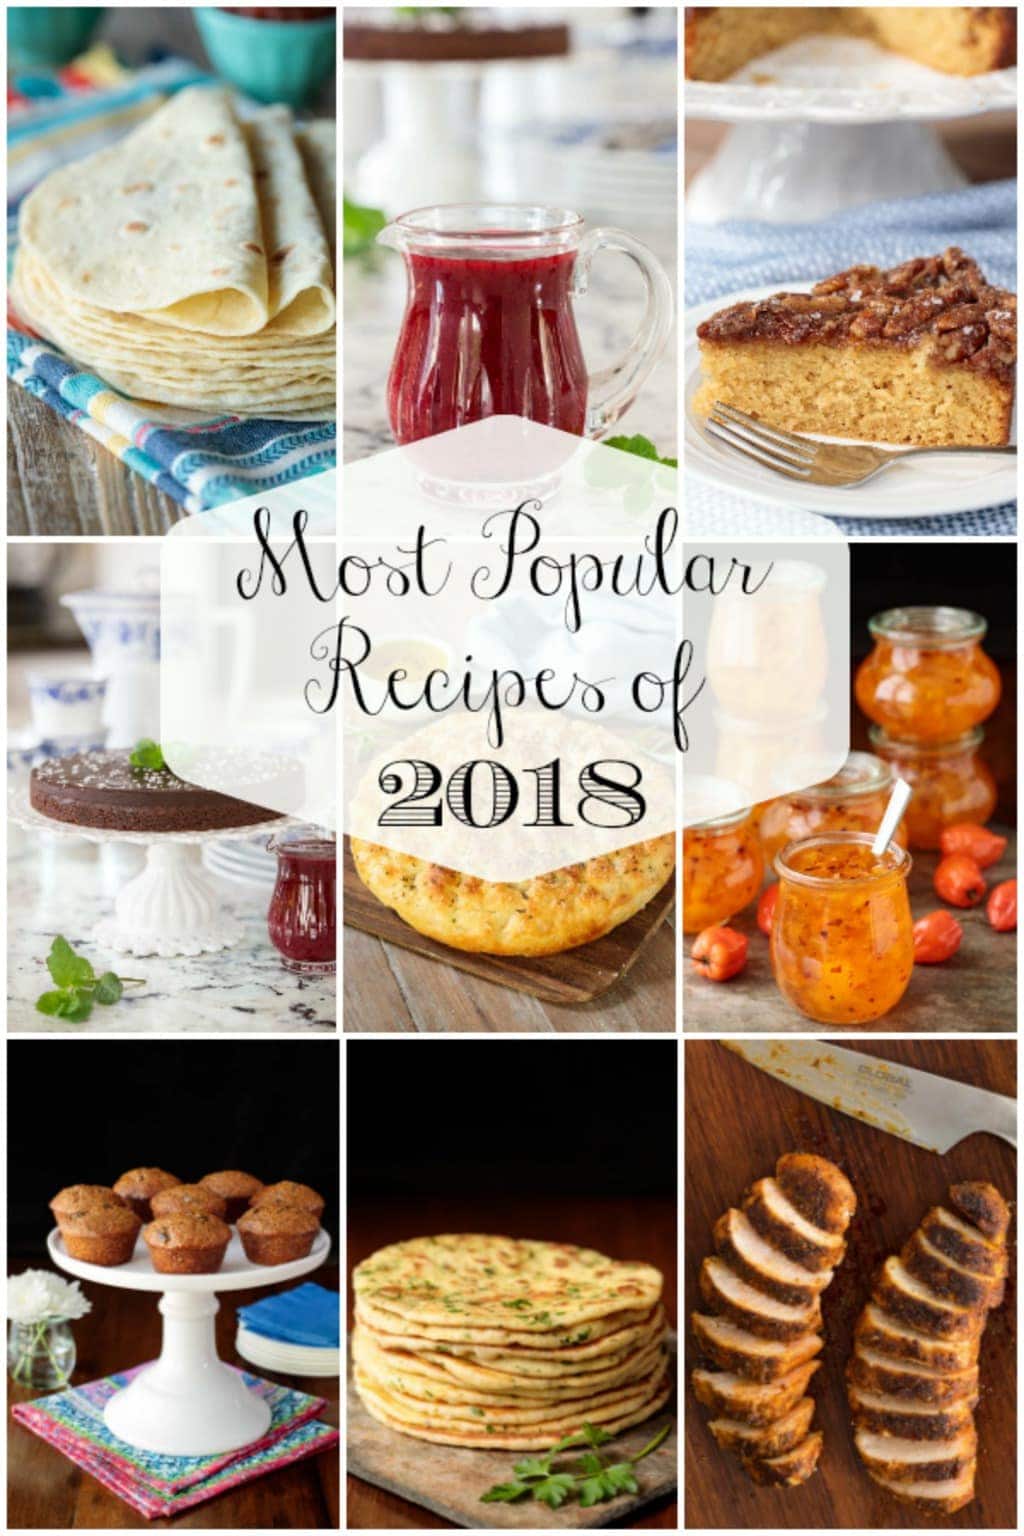 Collage of the most popular recipes of 2018